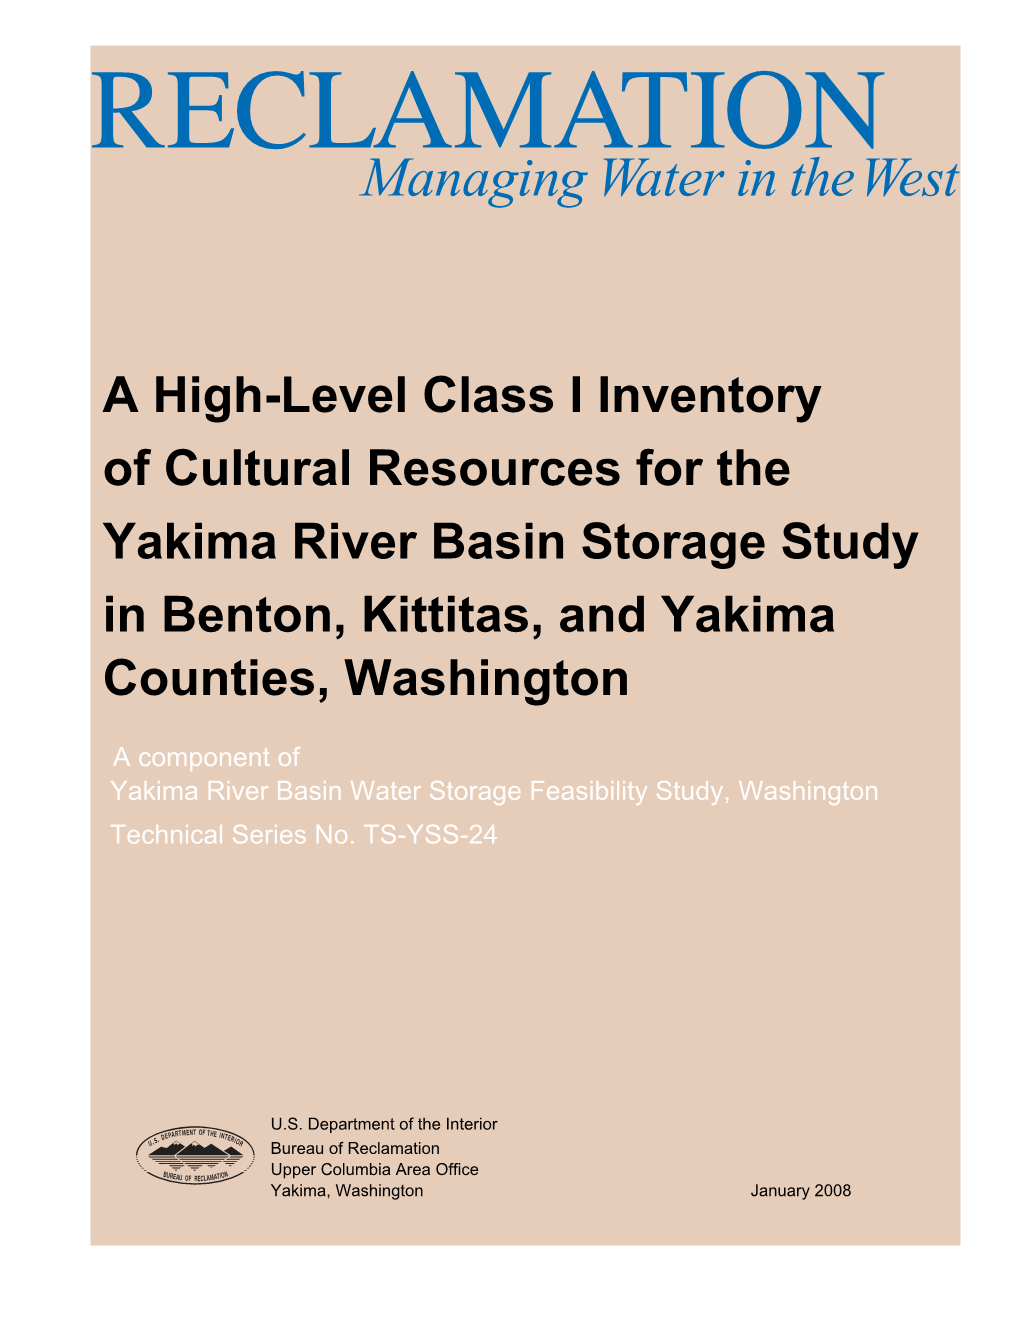 A High-Level Class I Inventory of Cultural Resources for the Yakima River Basin Storage Study in Benton, Kittitas, and Yakima